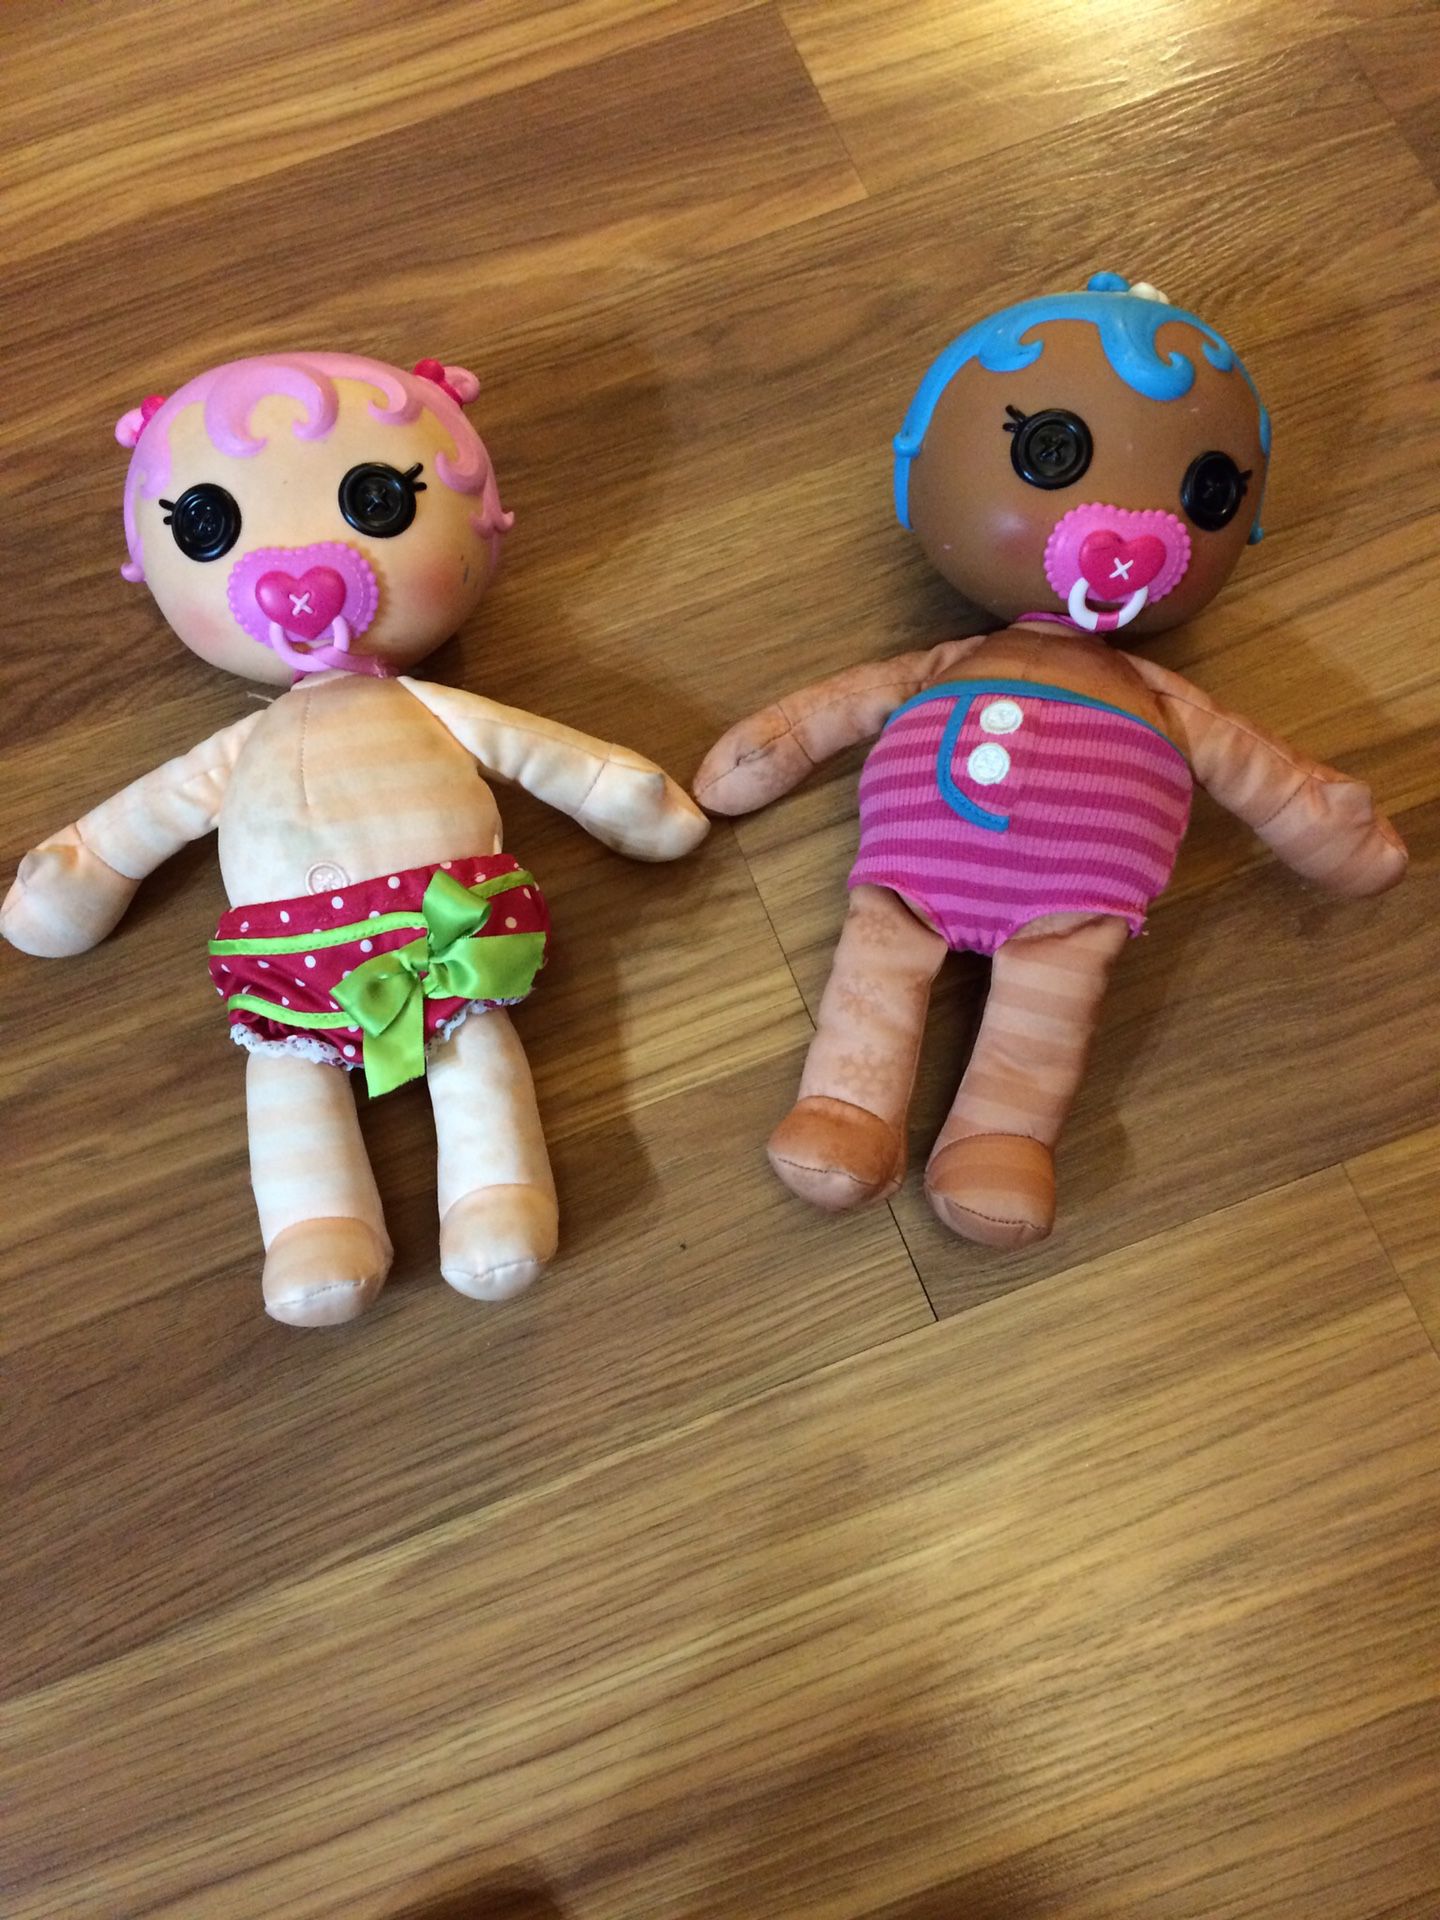 2. LALALOOPSY BABIES DOLLS .......12 Inches.........Both by $6....